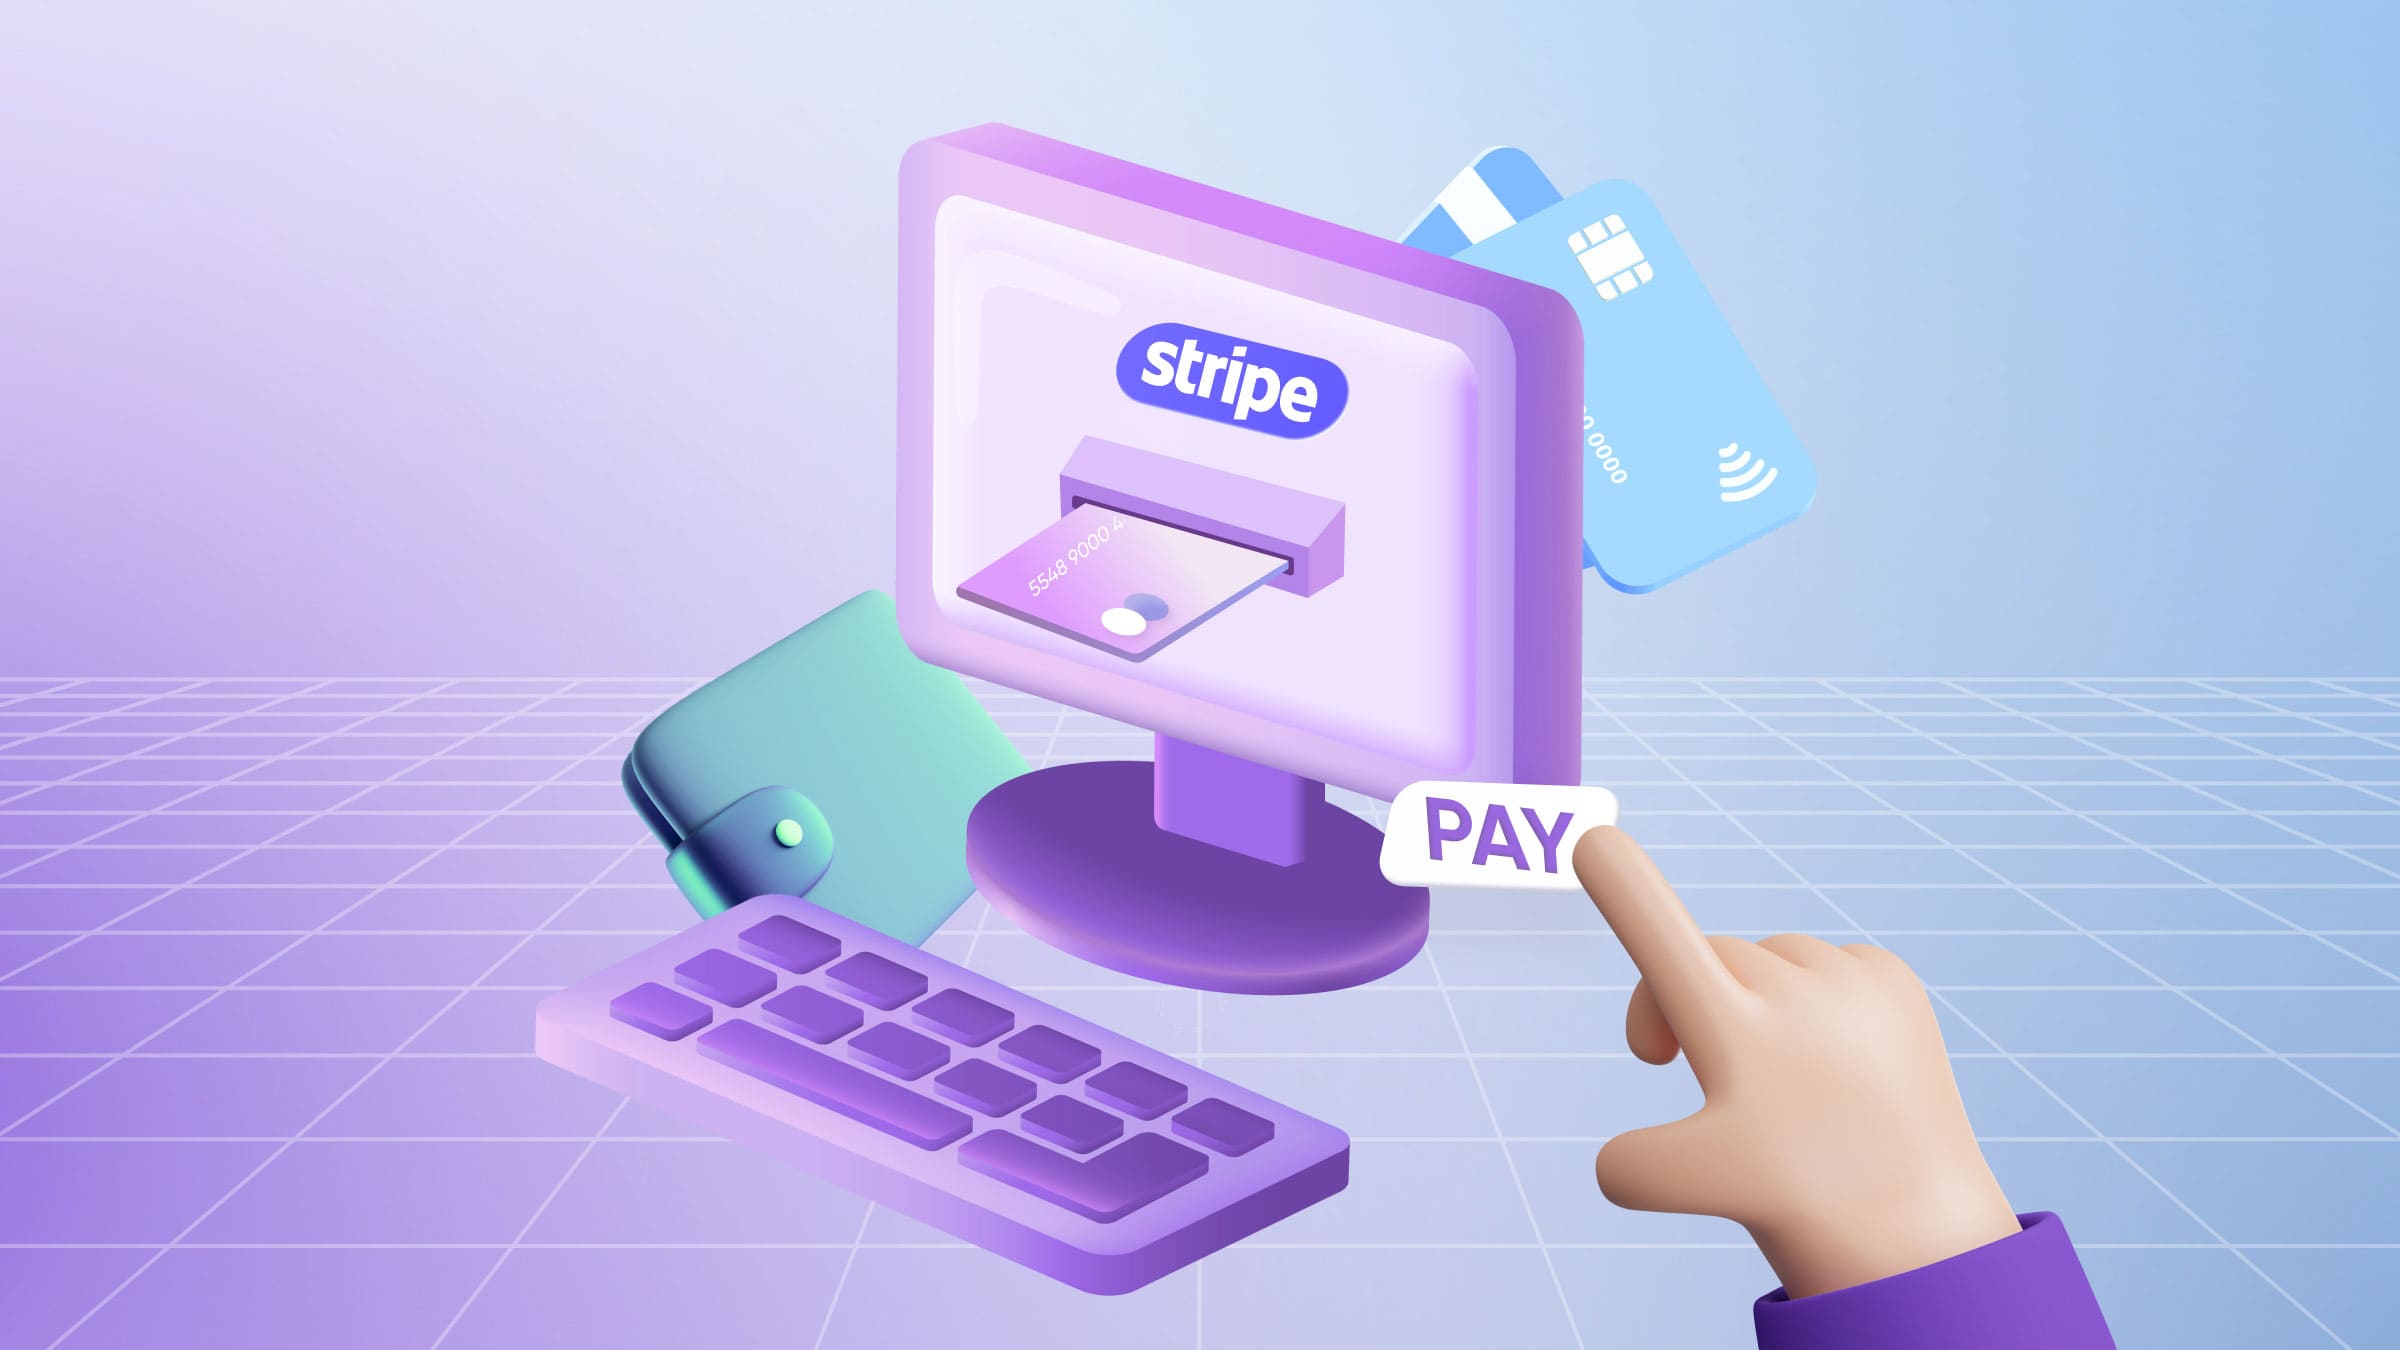 Stripe is an online international payment system.